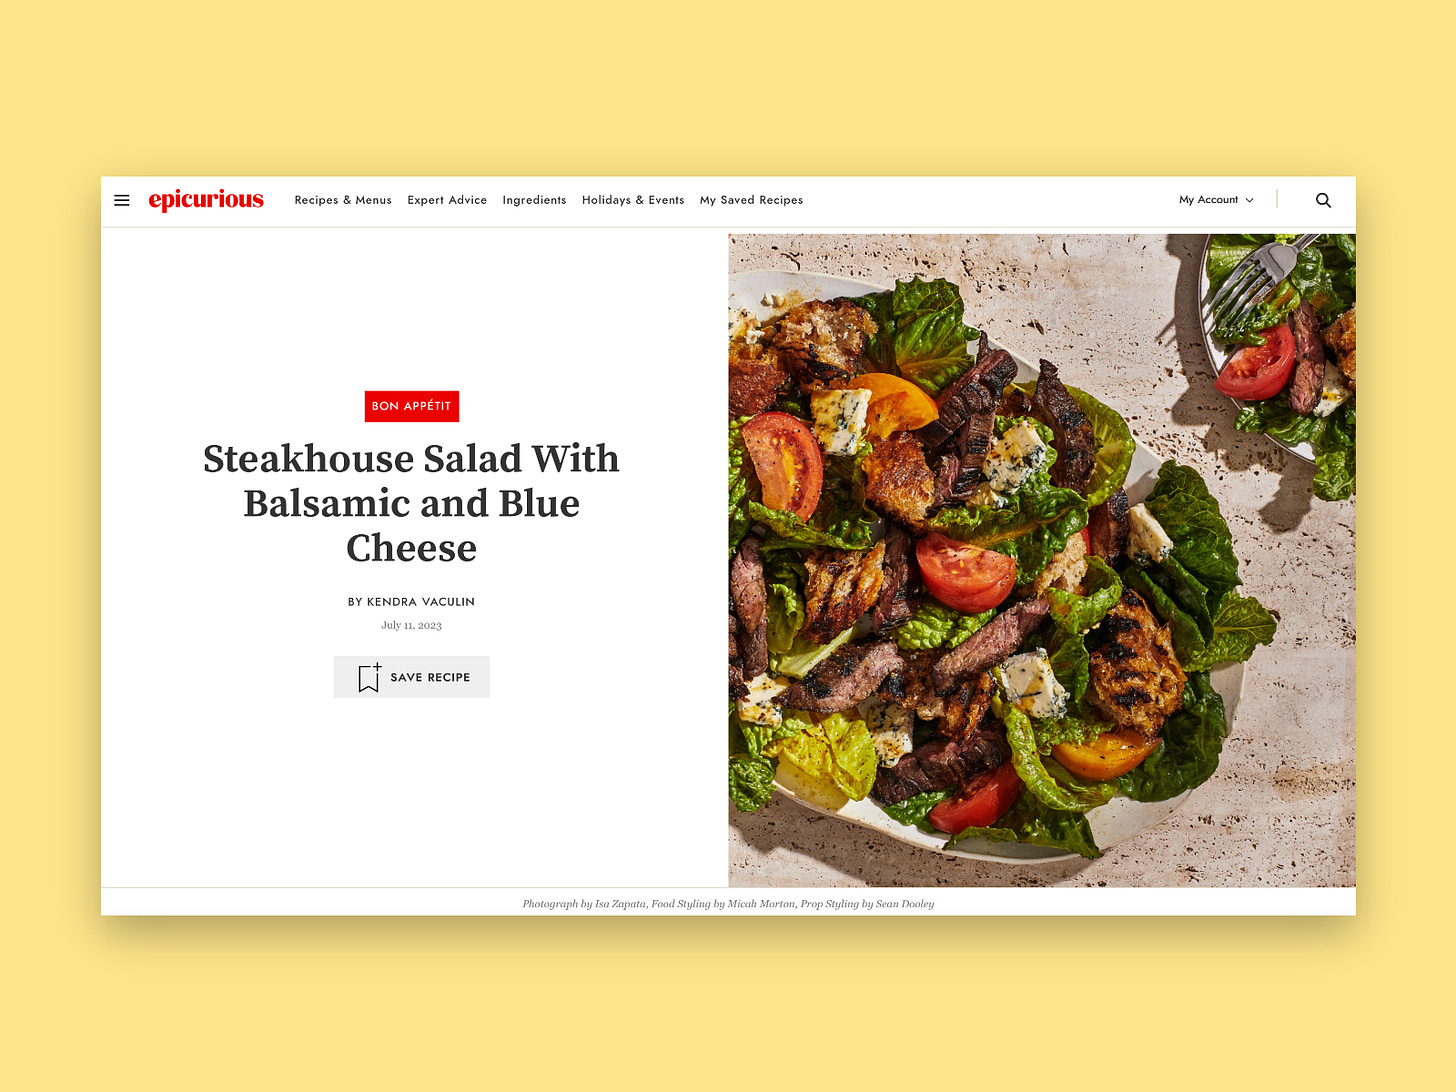 A screenshot of the food recipe website Epicurious, set against a yellow background. The screenshot shows the red Epicurious logo in the upper left-hand corner. Below is a recipe, with the title “steakhouse salad with balsamic and blue cheese” on the left side of the page. Directly above the name of the recipe is a red label that says “Bon Appetit.” To the right is a photo of a salad, with lettuce, sliced tomatoes, and grilled chicken on a white plate. 